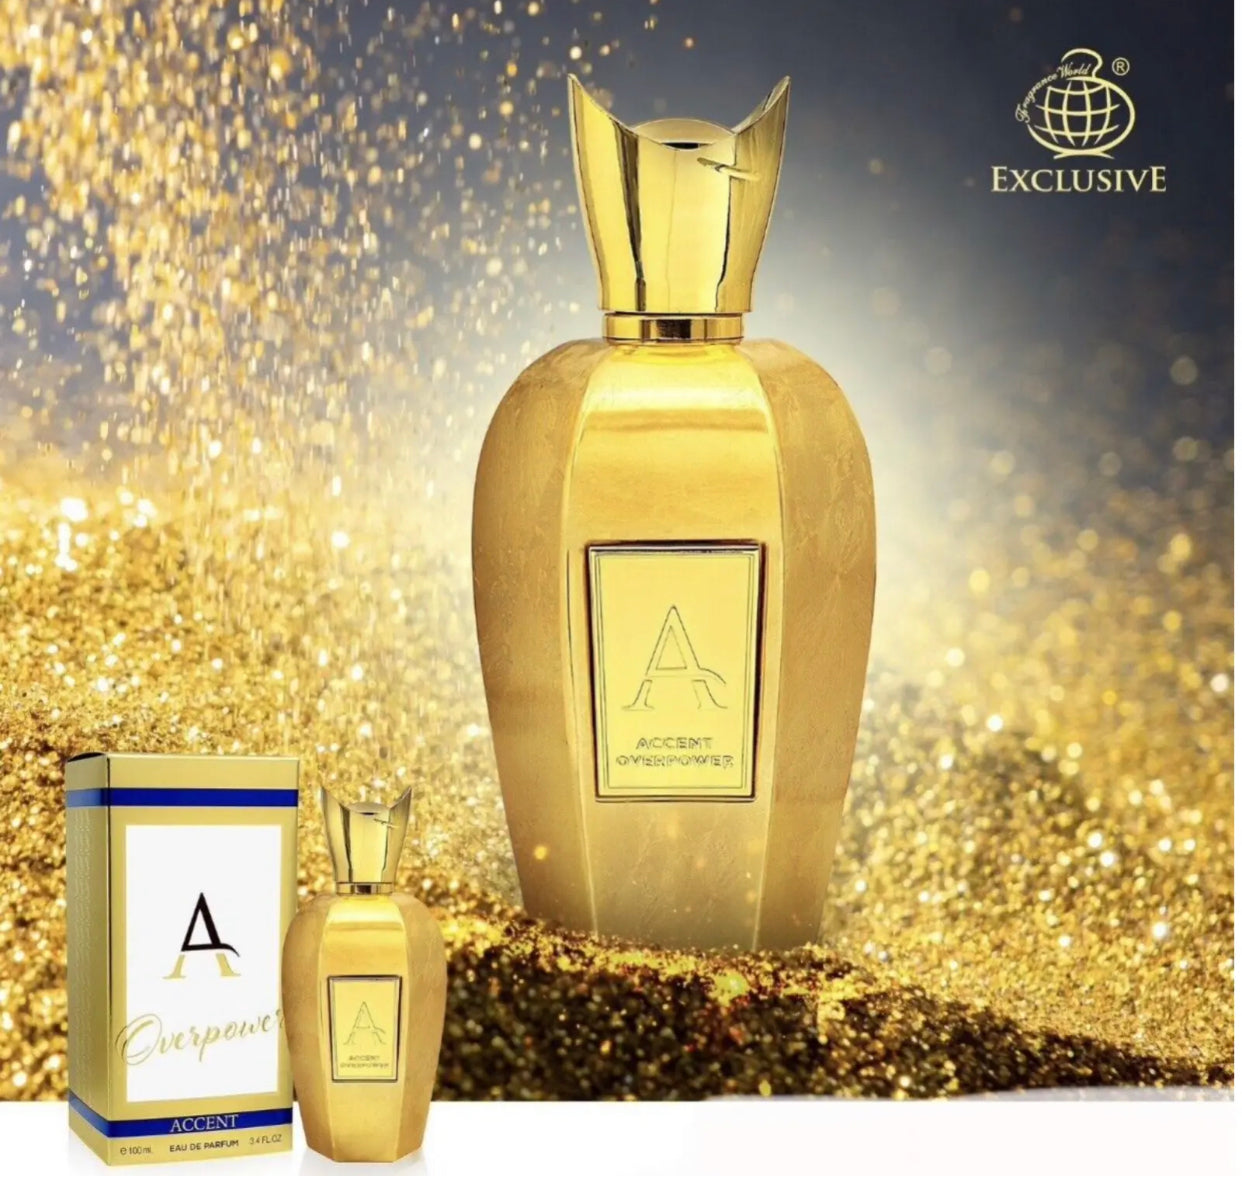 Accent Overpower EDP Perfume By Fragrance World 100 ML - US SELLER